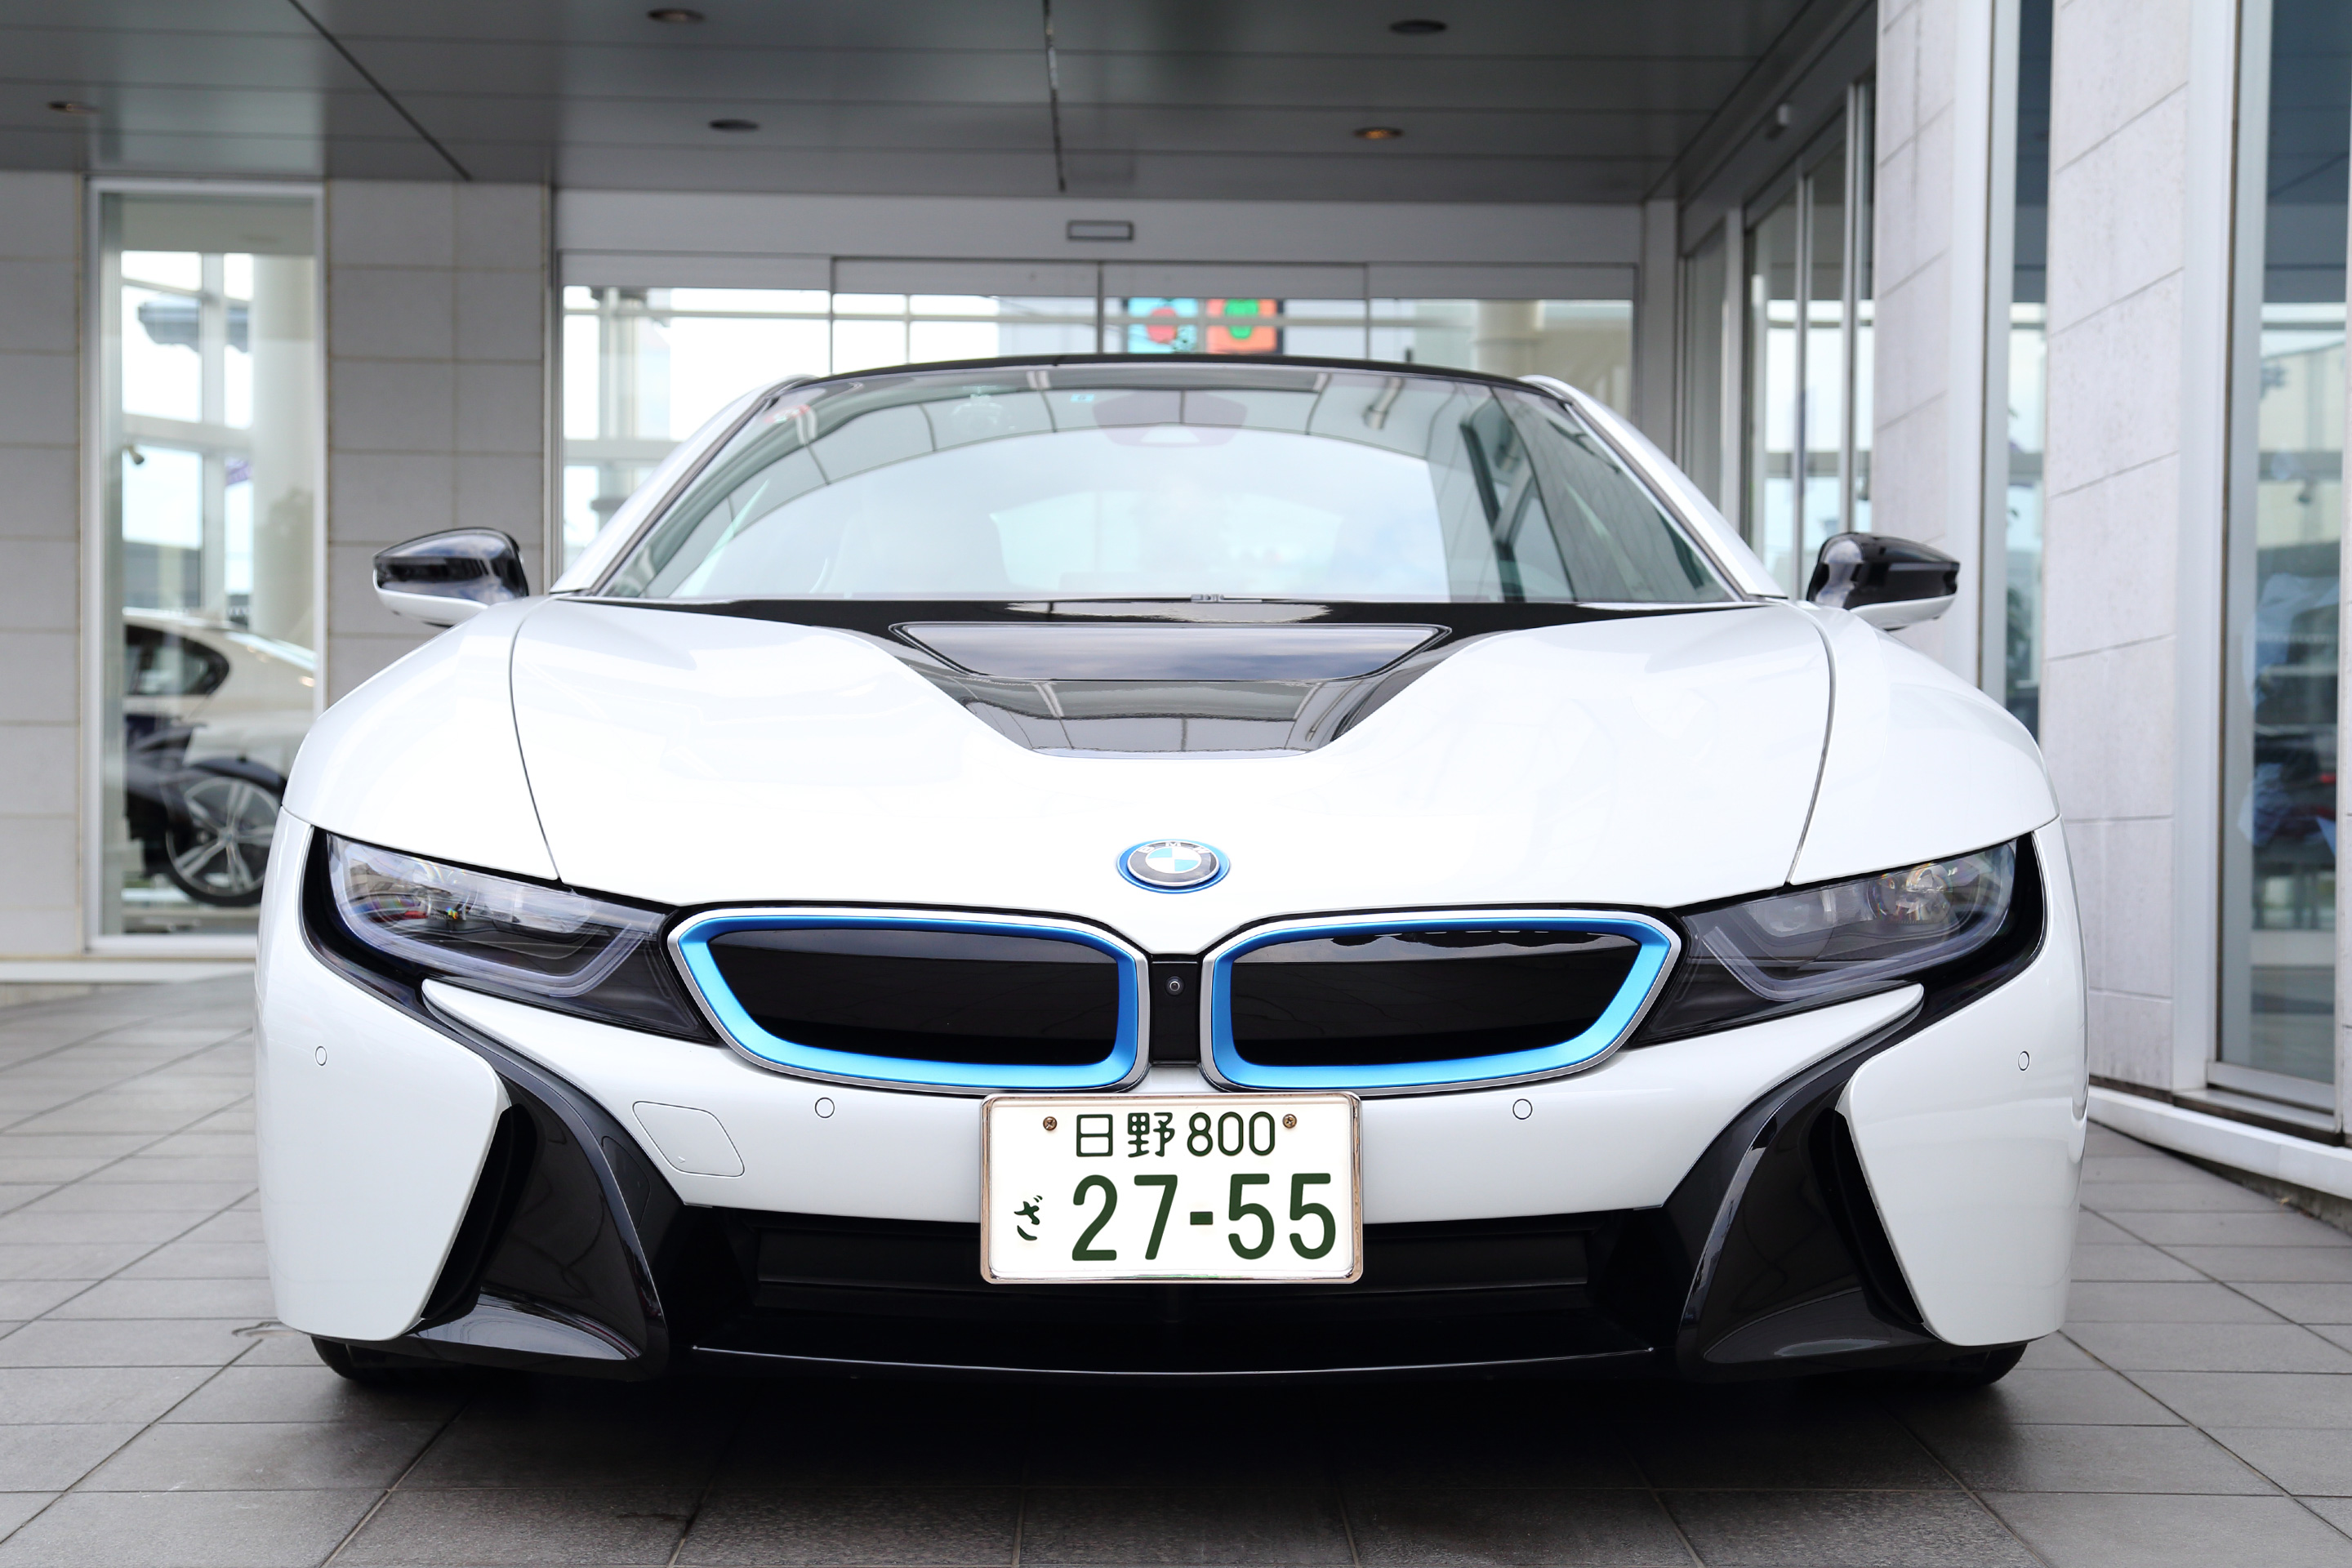 File:BMW i8 Japanese Edition by Front.jpg - Wikimedia Commons